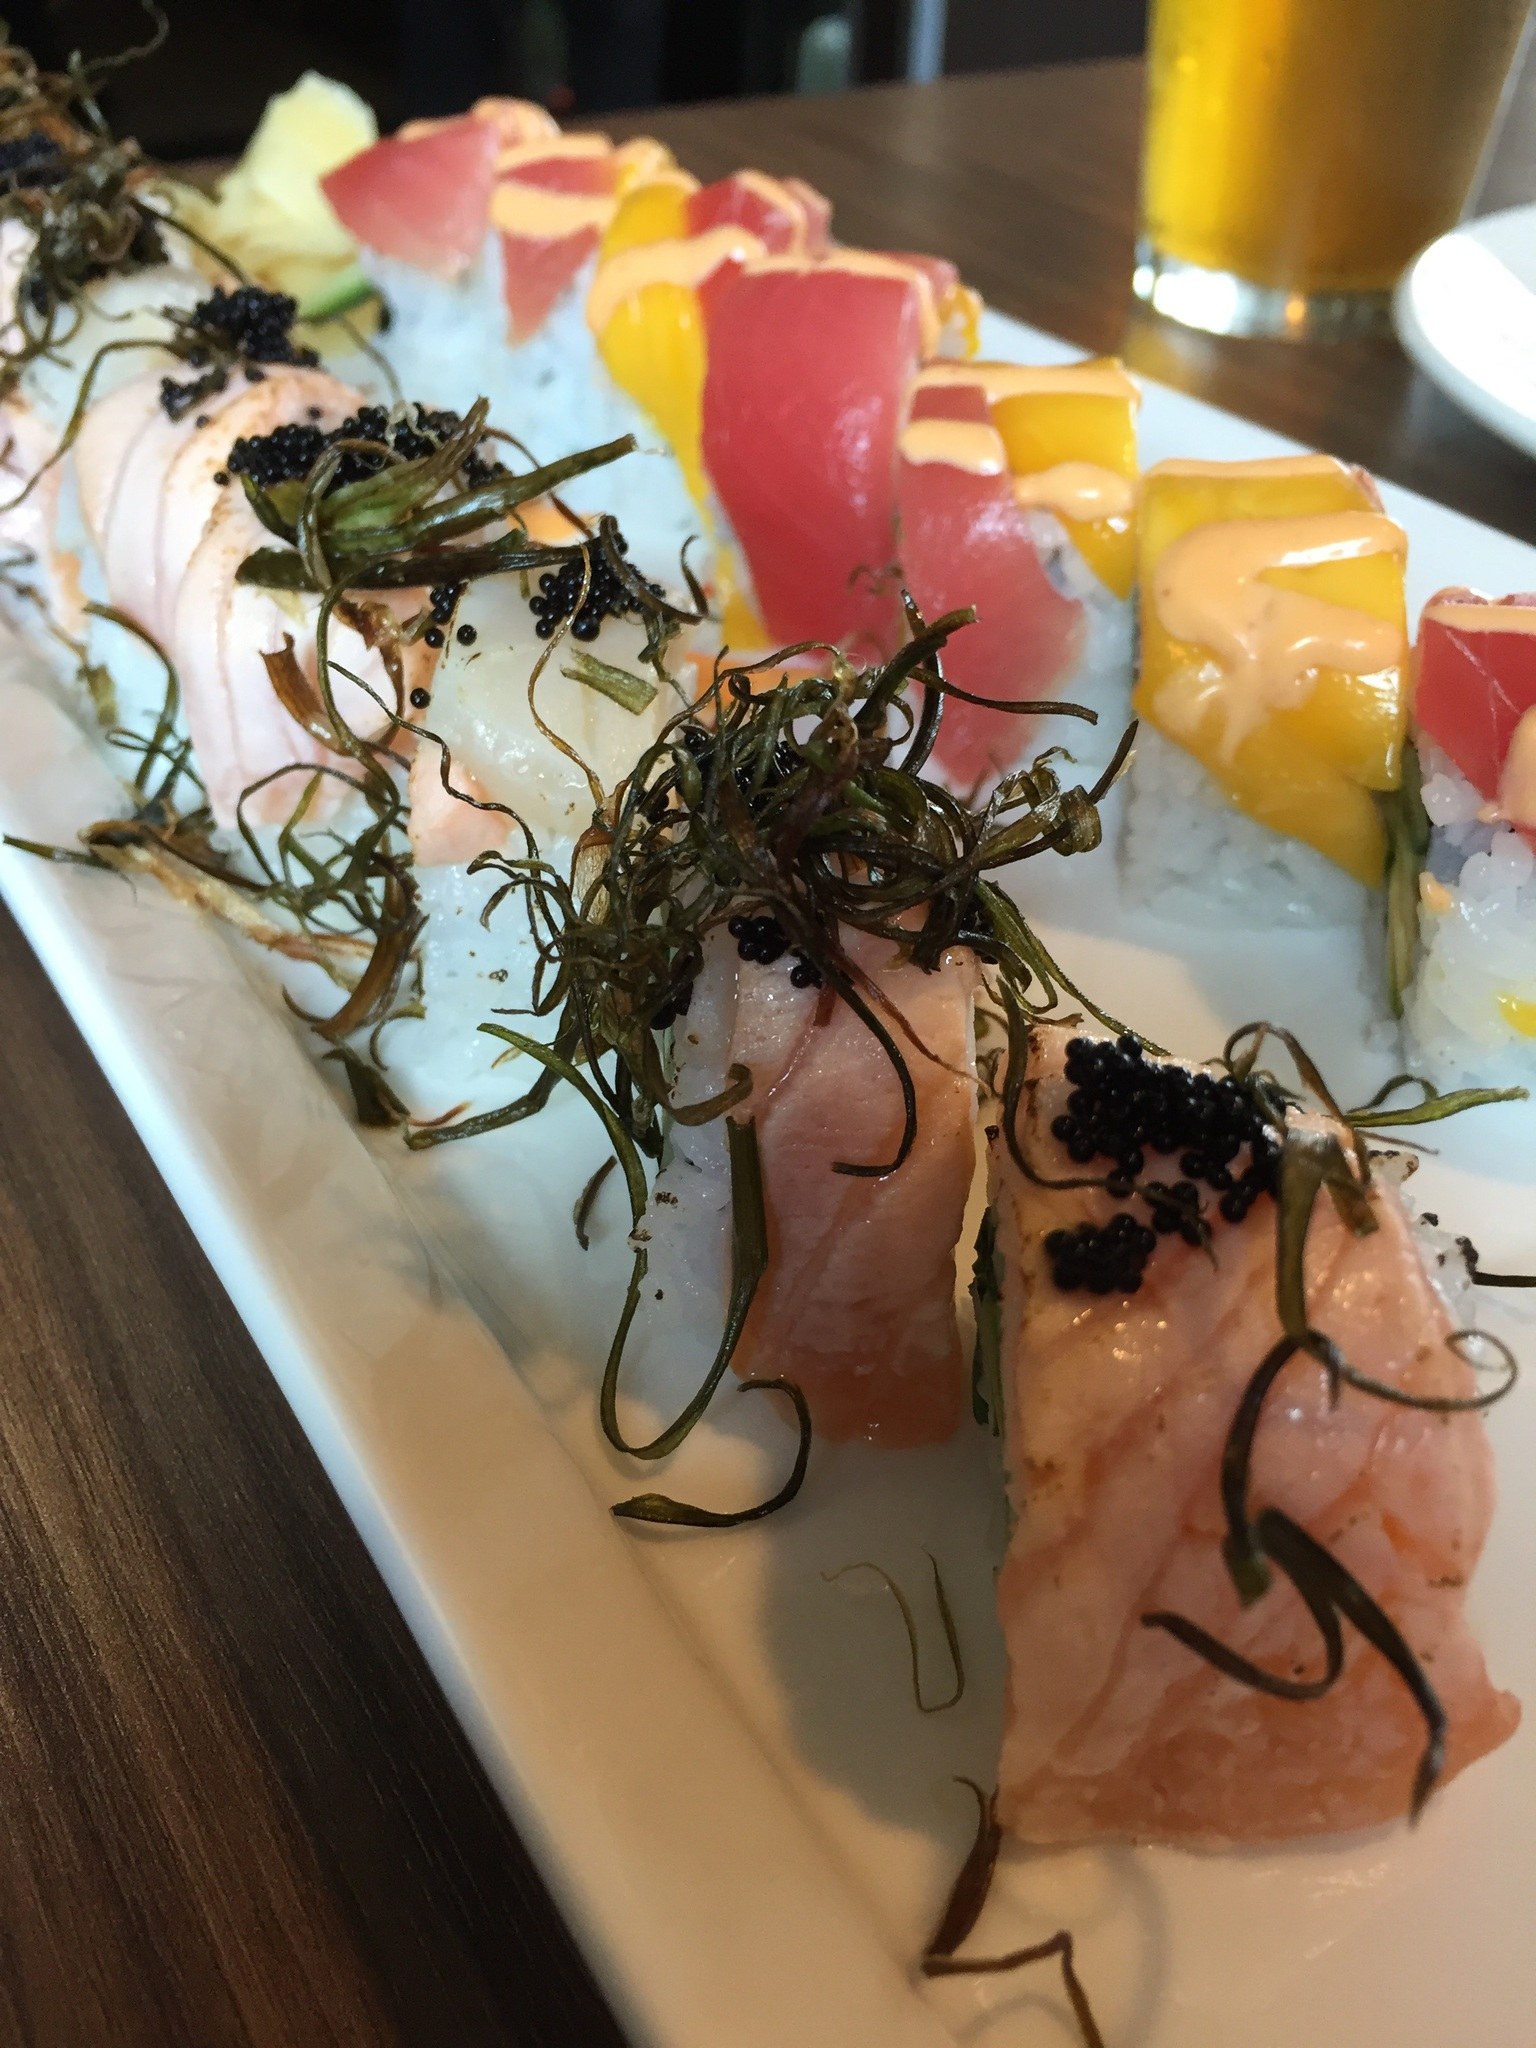 Sushi Chinoise features both traditional and modern maki-style sushi and Pan Asian cuisine. - Photo courtesy of Annemarie Charvat